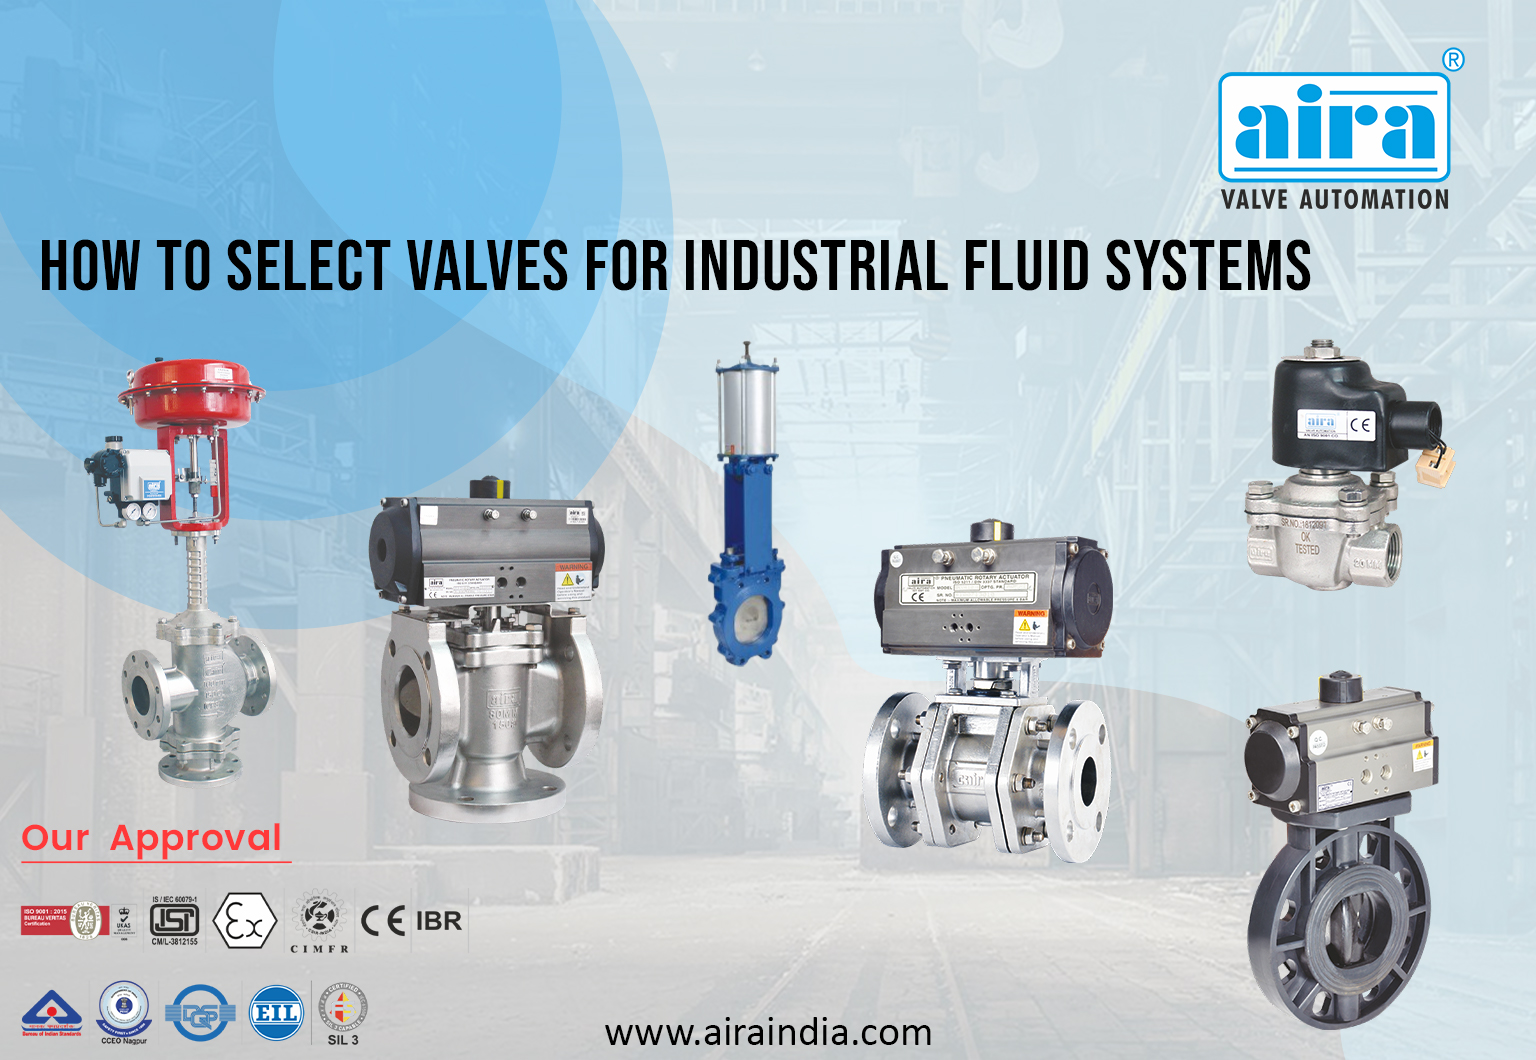 Perfect Valve for Your Fluid System at aira euro valve top manufacturer